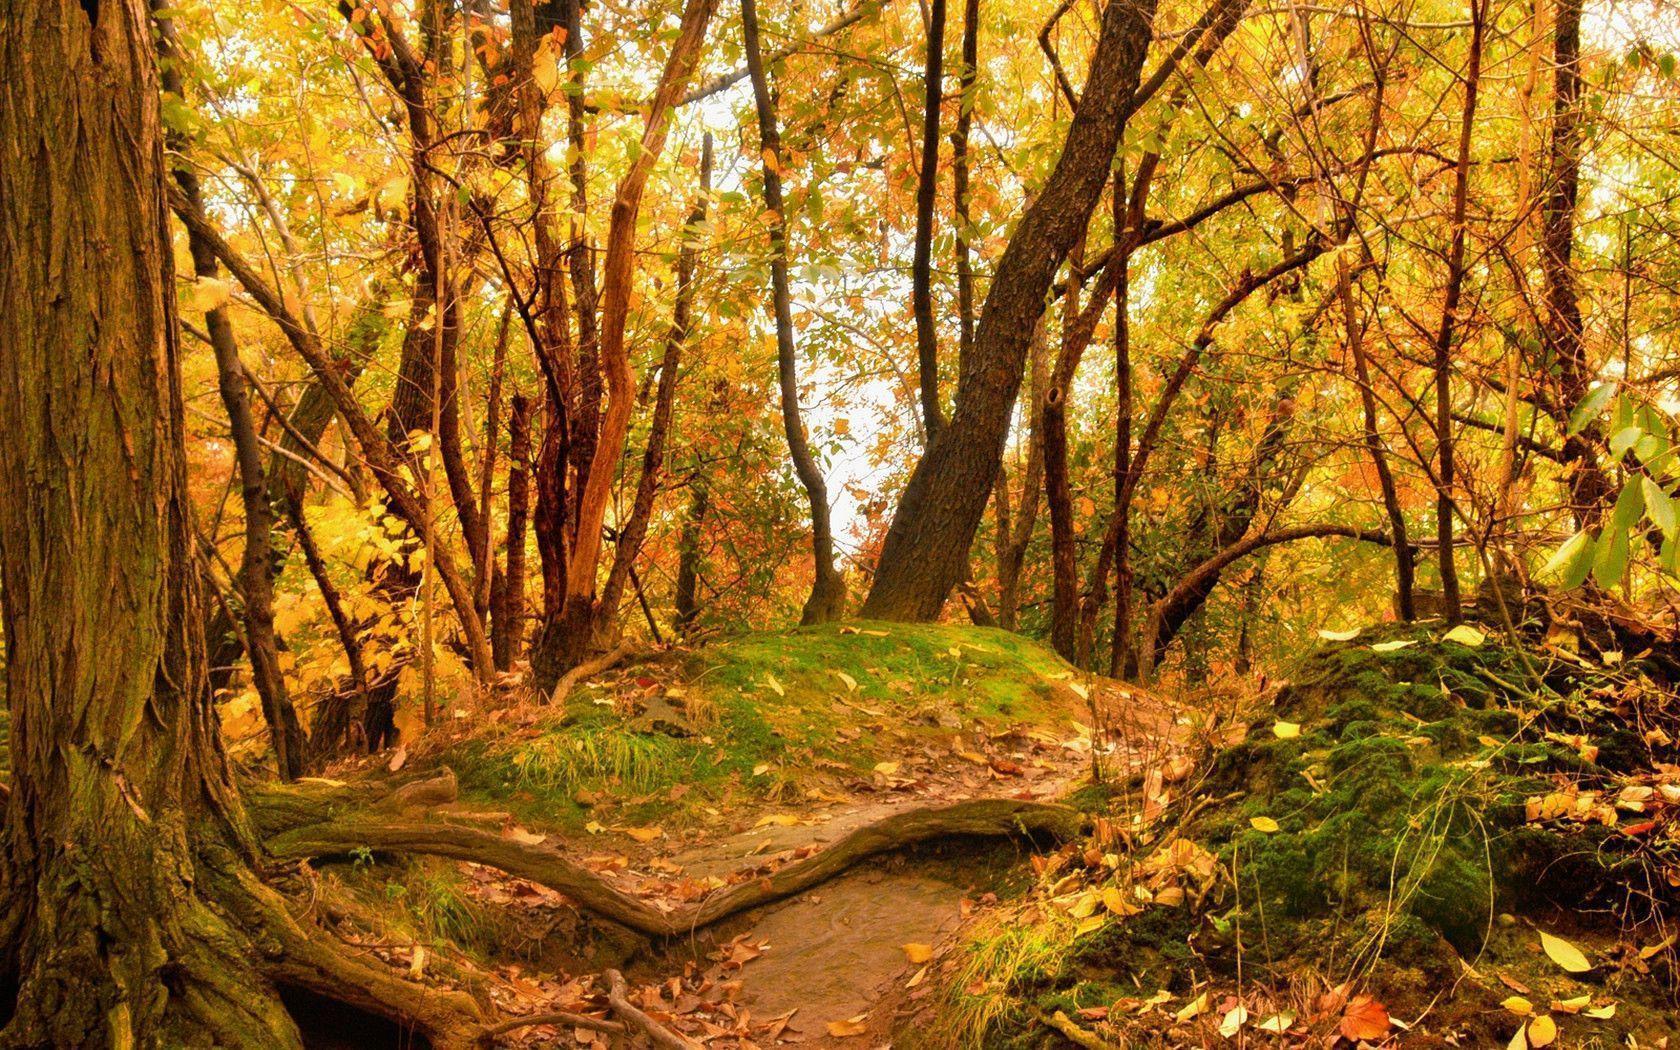 Autumn Scenery Wallpapers Wallpaper Cave